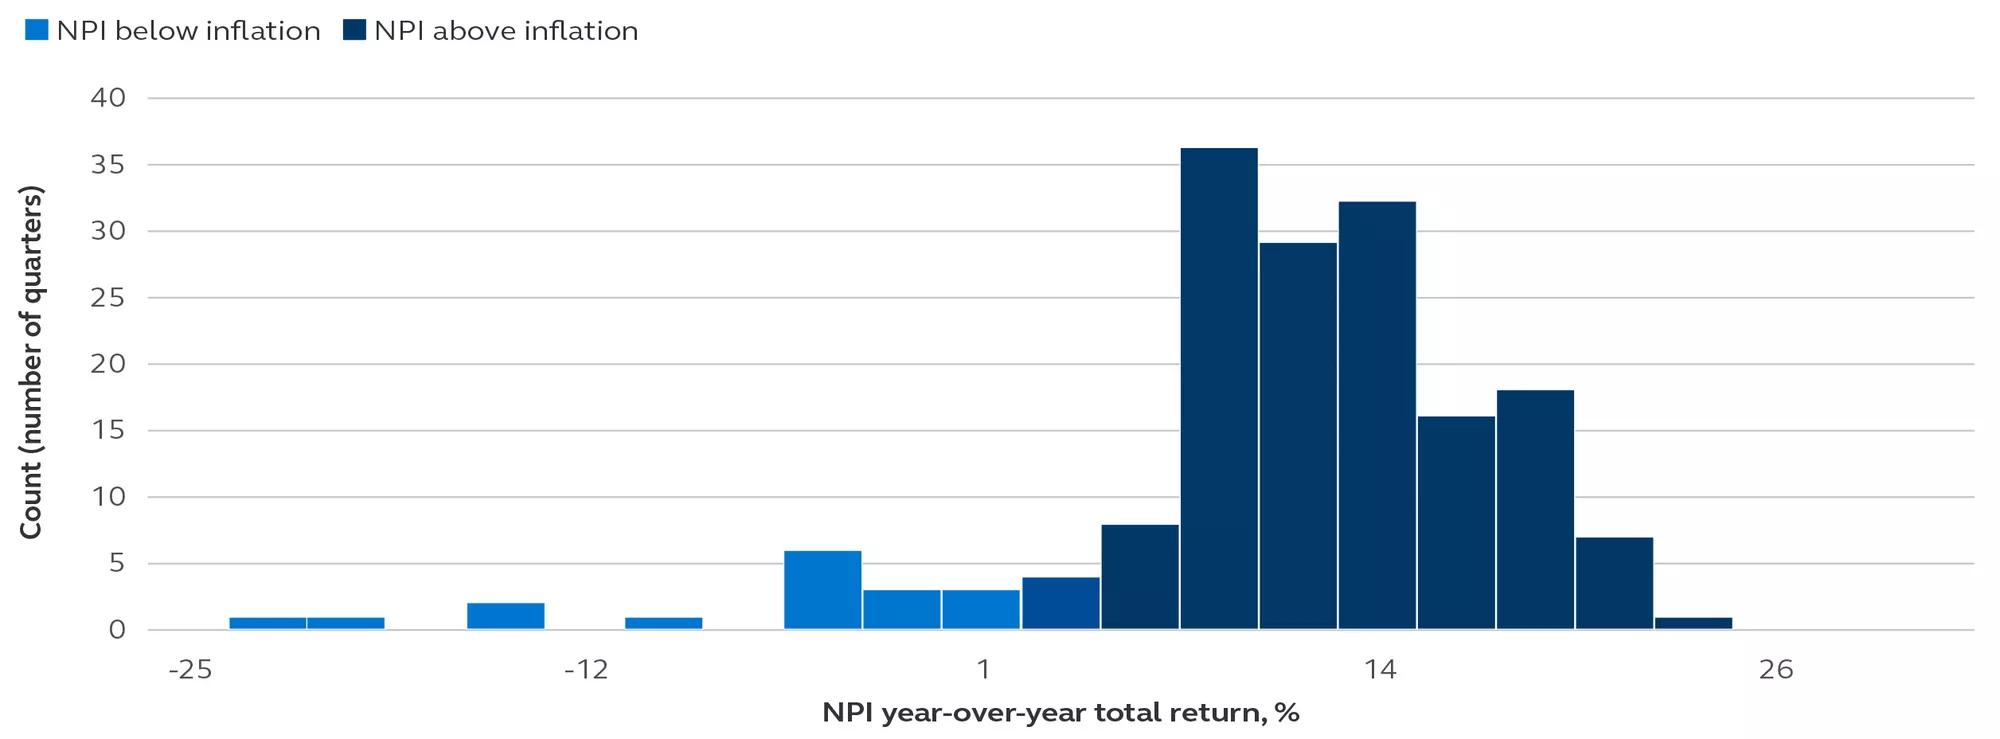 Bar chart comparing NPI year-over-year total return (%) with number of quarters